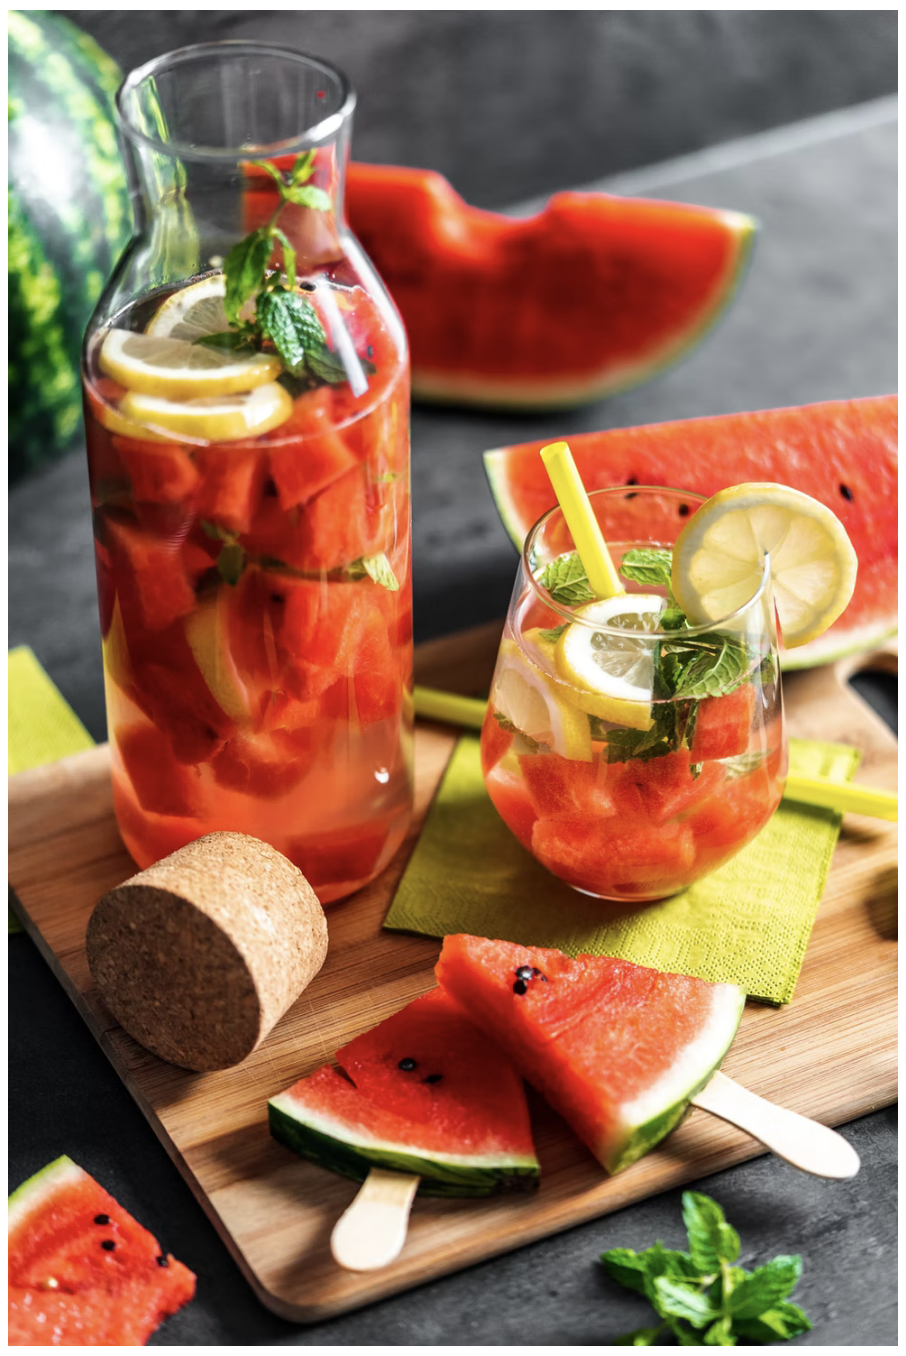 A pitcher and glass of watermelon punch garnished with watermelon slices, lemon wedges, and mint